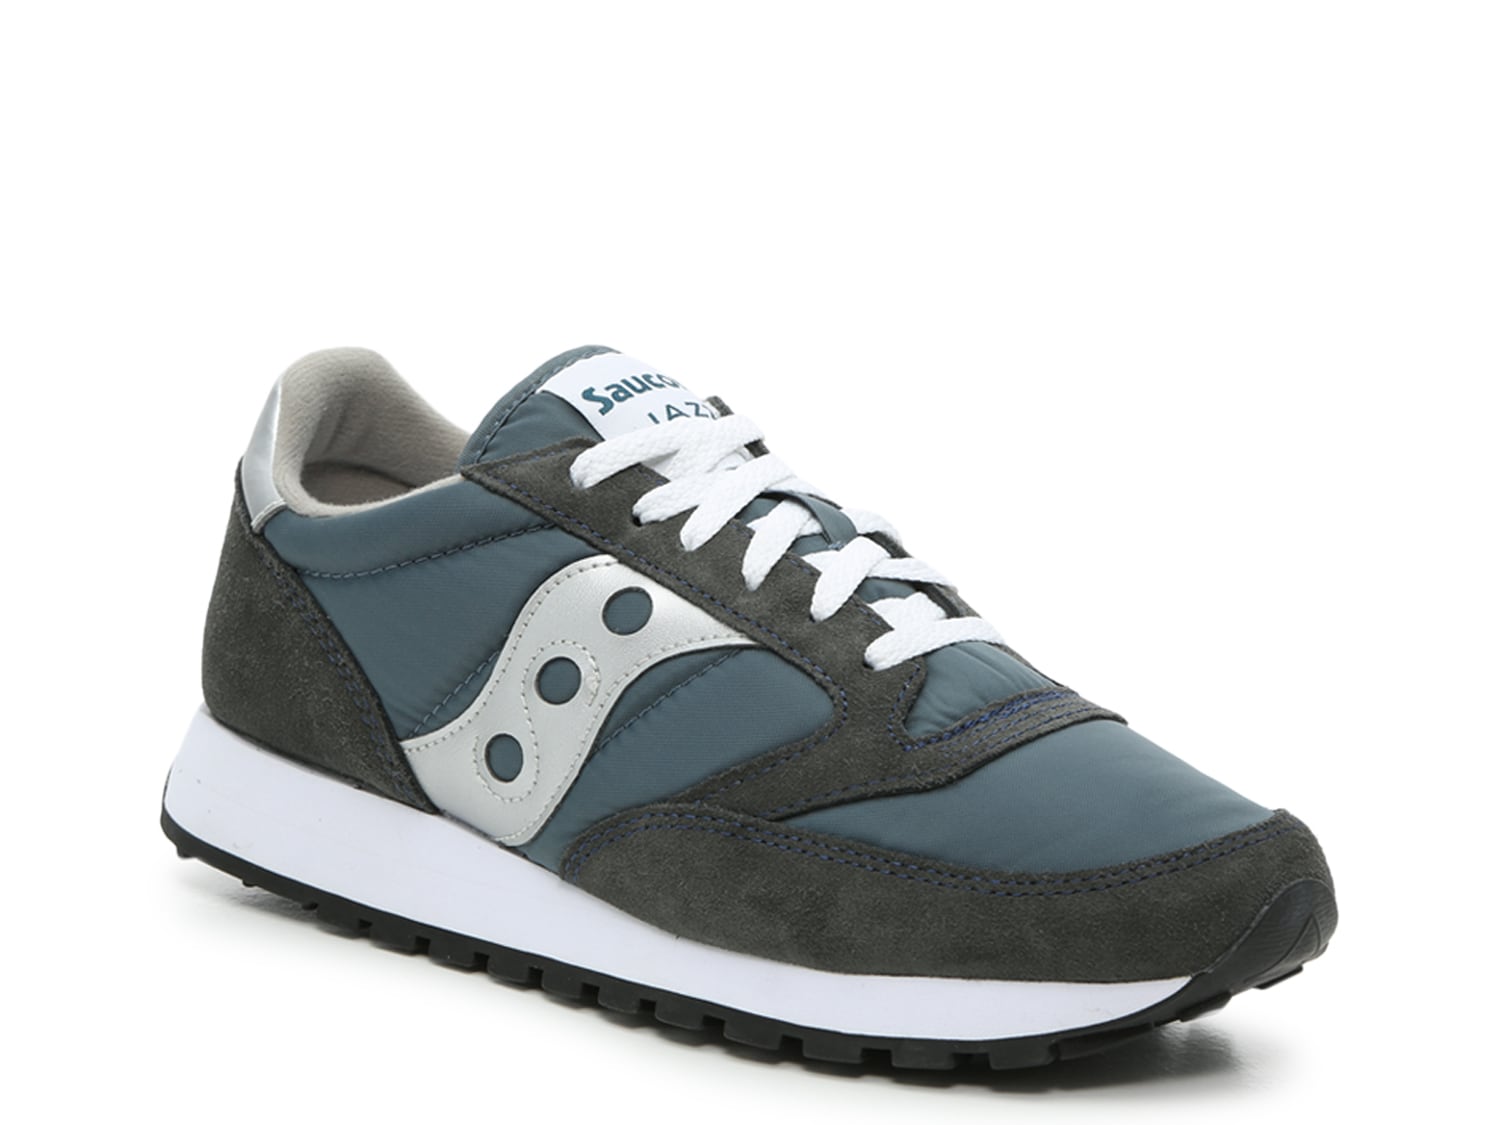 saucony sneakers at dsw